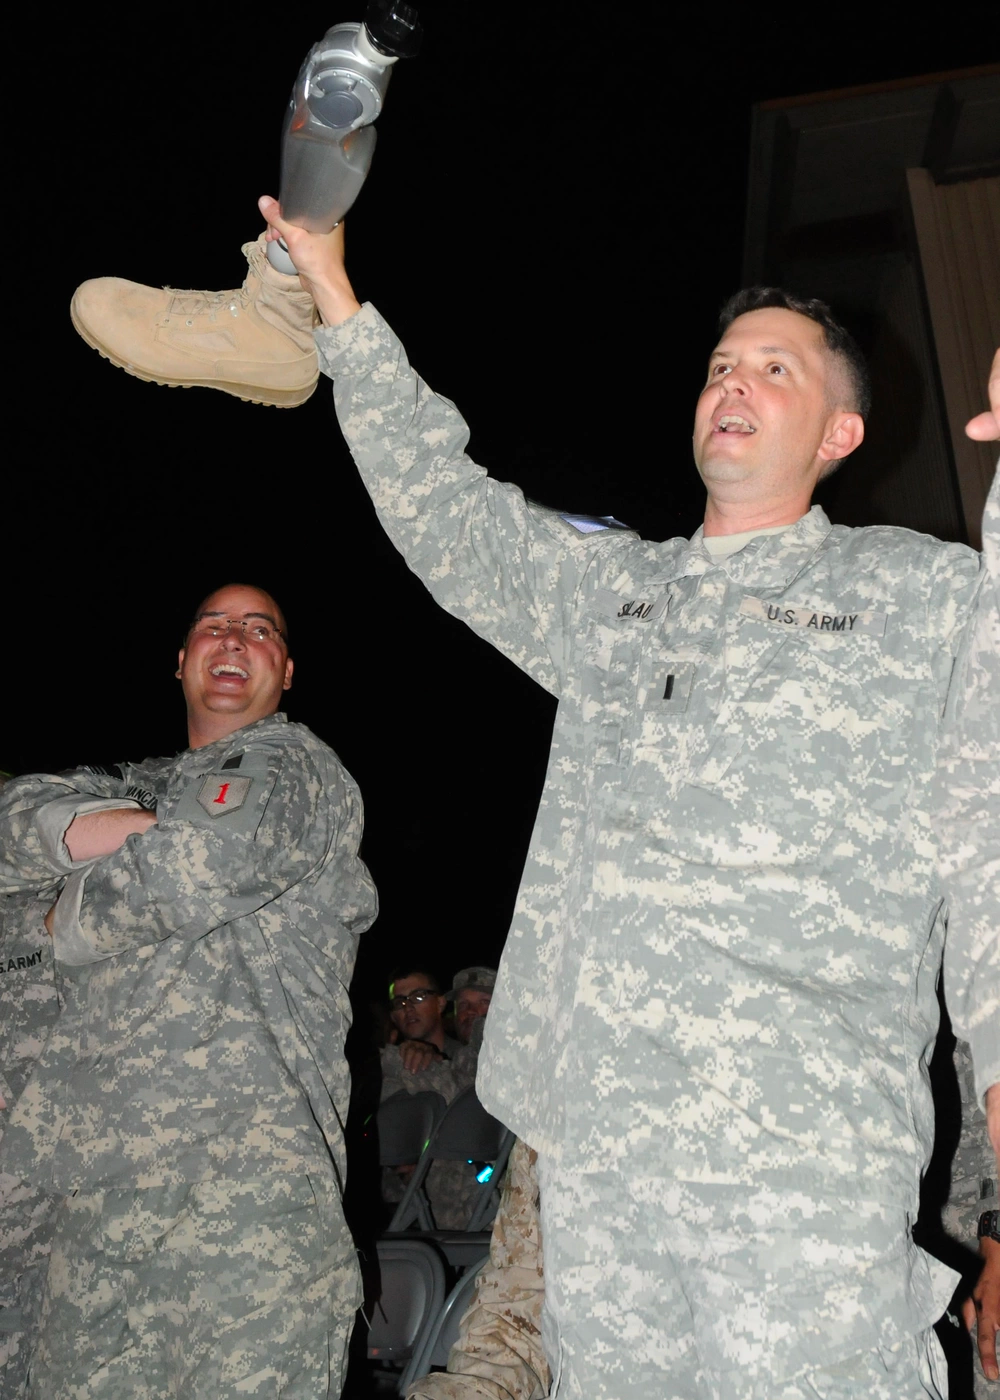 Retired Army 1st Lt. Ed Salau holds his prosthetic leg in the air and sings during a Toby Keith concert on Camp Liberty, April 25, 2011. The warriors participated in Operation Proper Exit IX, which assists wounded troops in getting the closure they need in the healing process. U.S. Army photo.